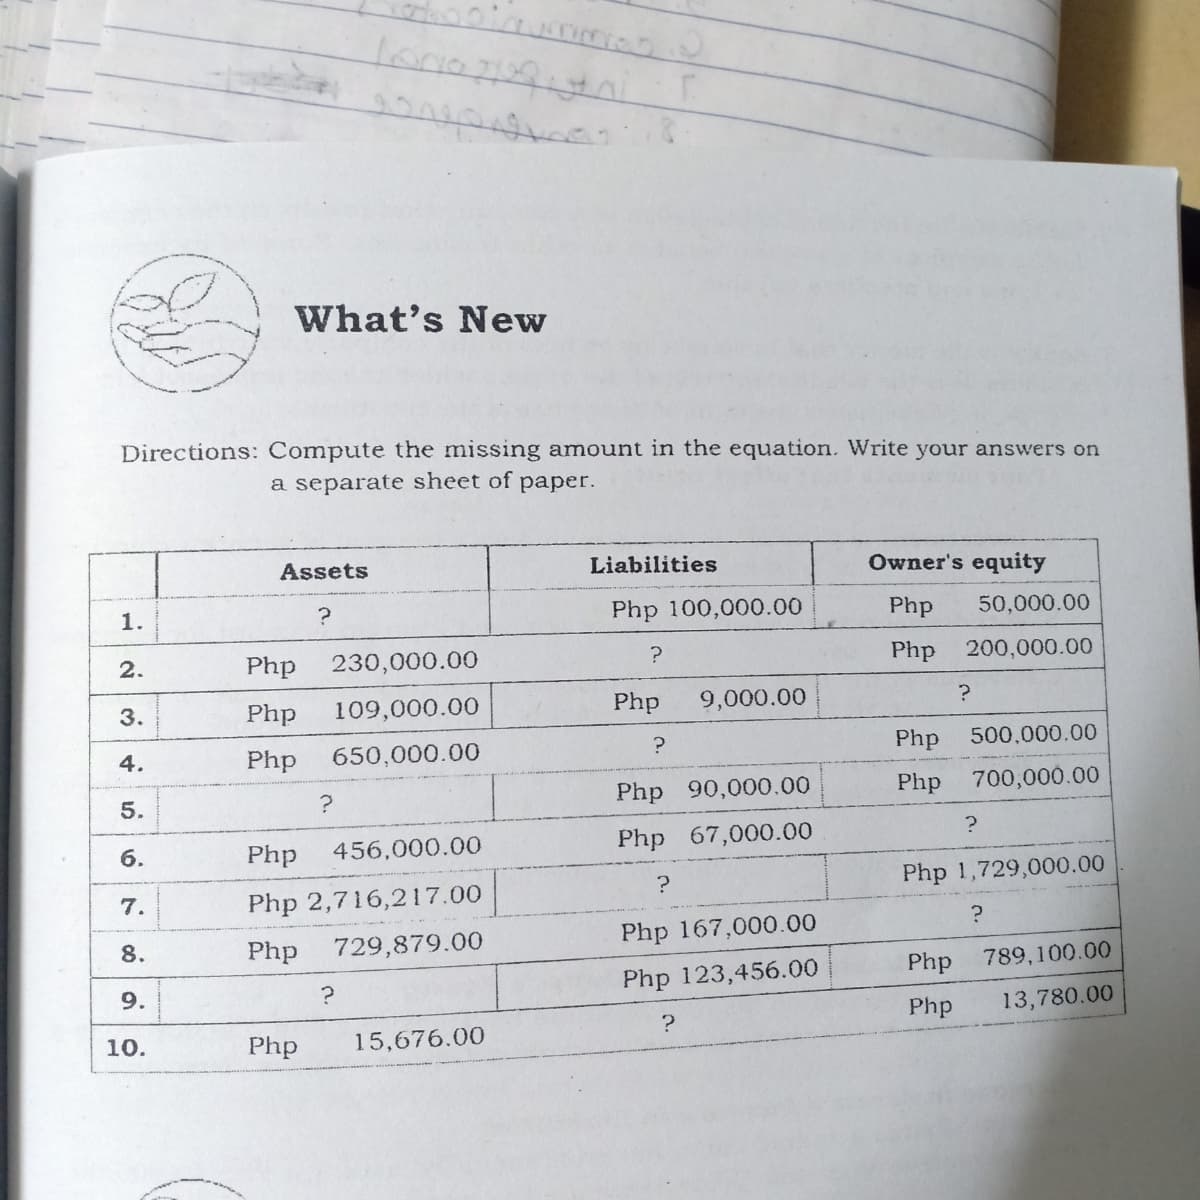 What's New
Directions: Compute the missing amount in the equation. Write your answers on
a separate sheet of paper.
Assets
Liabilities
Owner's equity
1.
Php 100,000.00
Php
50,000.00
2.
Php
230,000.00
Php
200,000.00
Php
109,000.00
Php
9,000.00
Php
650,000.00
Php
500,000.00
Php 90,000.00
Php 700,000.00
Php
456,000.00
Php 67,000.00
Php 1,729,000.00
Php 2,716,217.00
Php 729,879.00
Php 167,000.00
8.
Php
789,100.00
9.
Php 123,456.00
Php
13,780.00
?
10.
Php
15,676.00
3.
4.
5.
6.
7.
